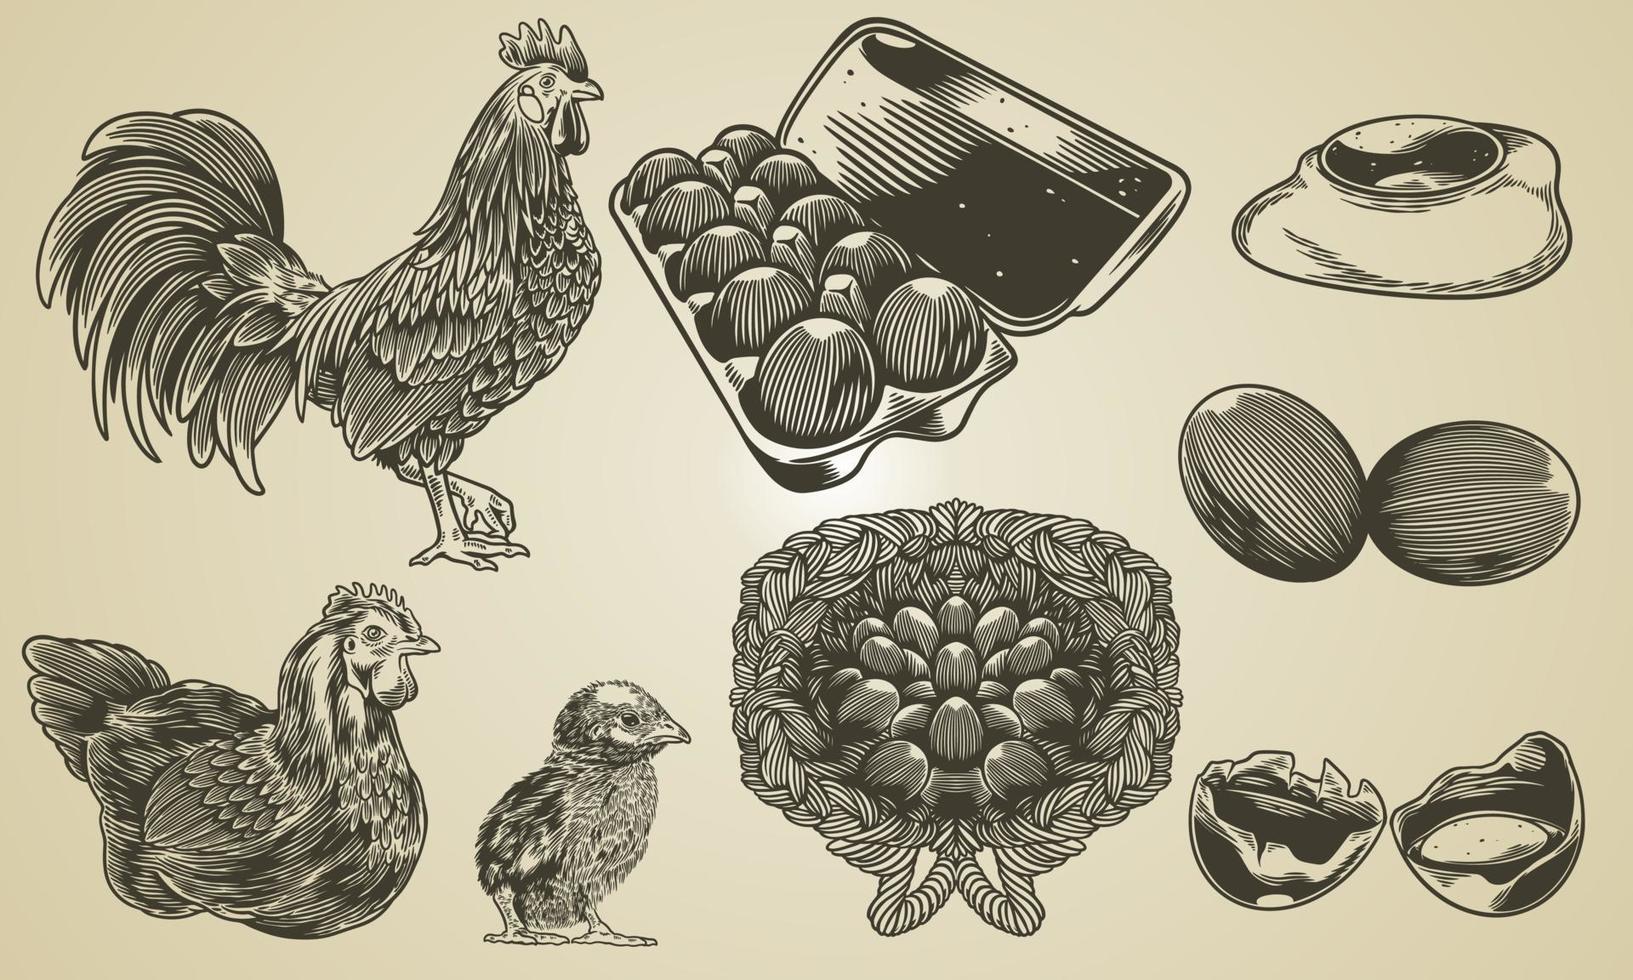 vector hand drawn vintage engraving chicken collection of farm design elements. Illustrations of roaster, hen, baby chicks, packaged egg, fried egg, cracking egg in retro sketch or etching style